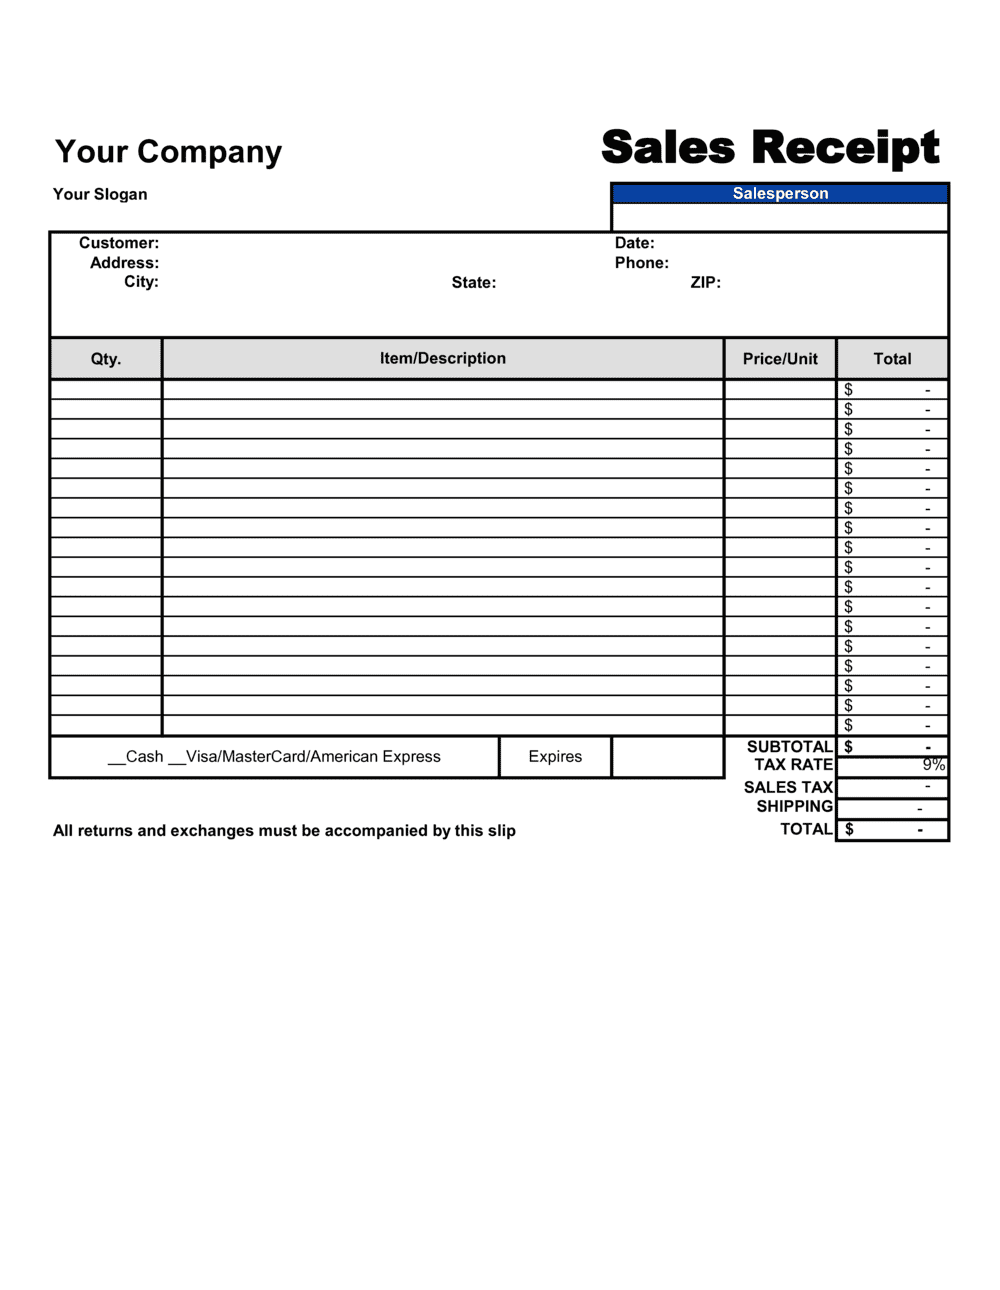 Sales Receipt Template By Business in a Box 